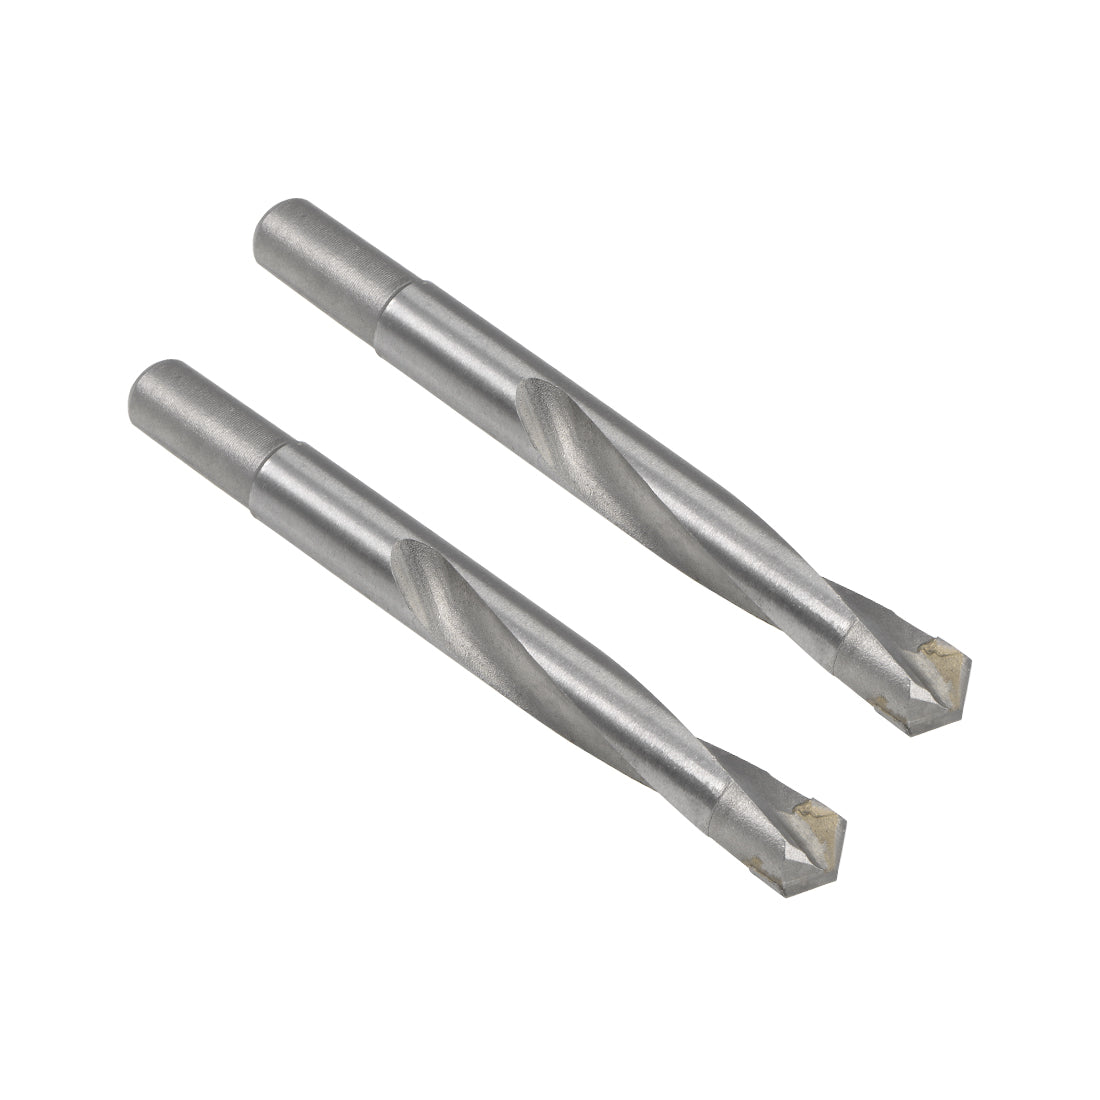 uxcell Uxcell 11mm Cemented Carbide Twist Drill Bits for Stainless Steel Copper Aluminum 2 Pcs